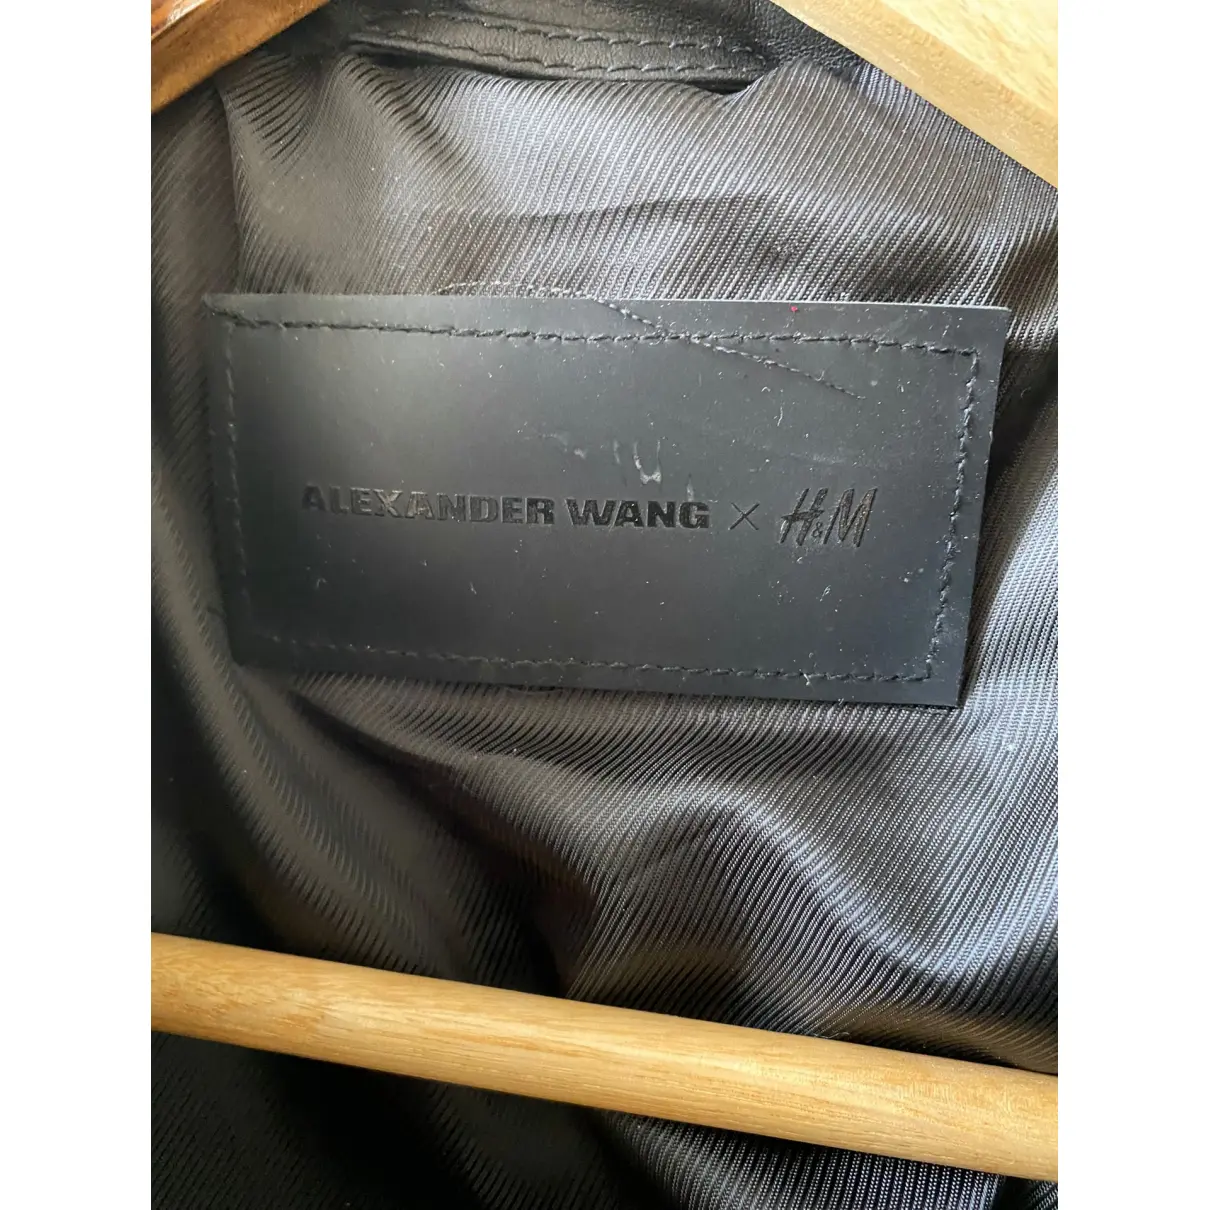 Buy Alexander Wang Pour H&M Leather jacket online